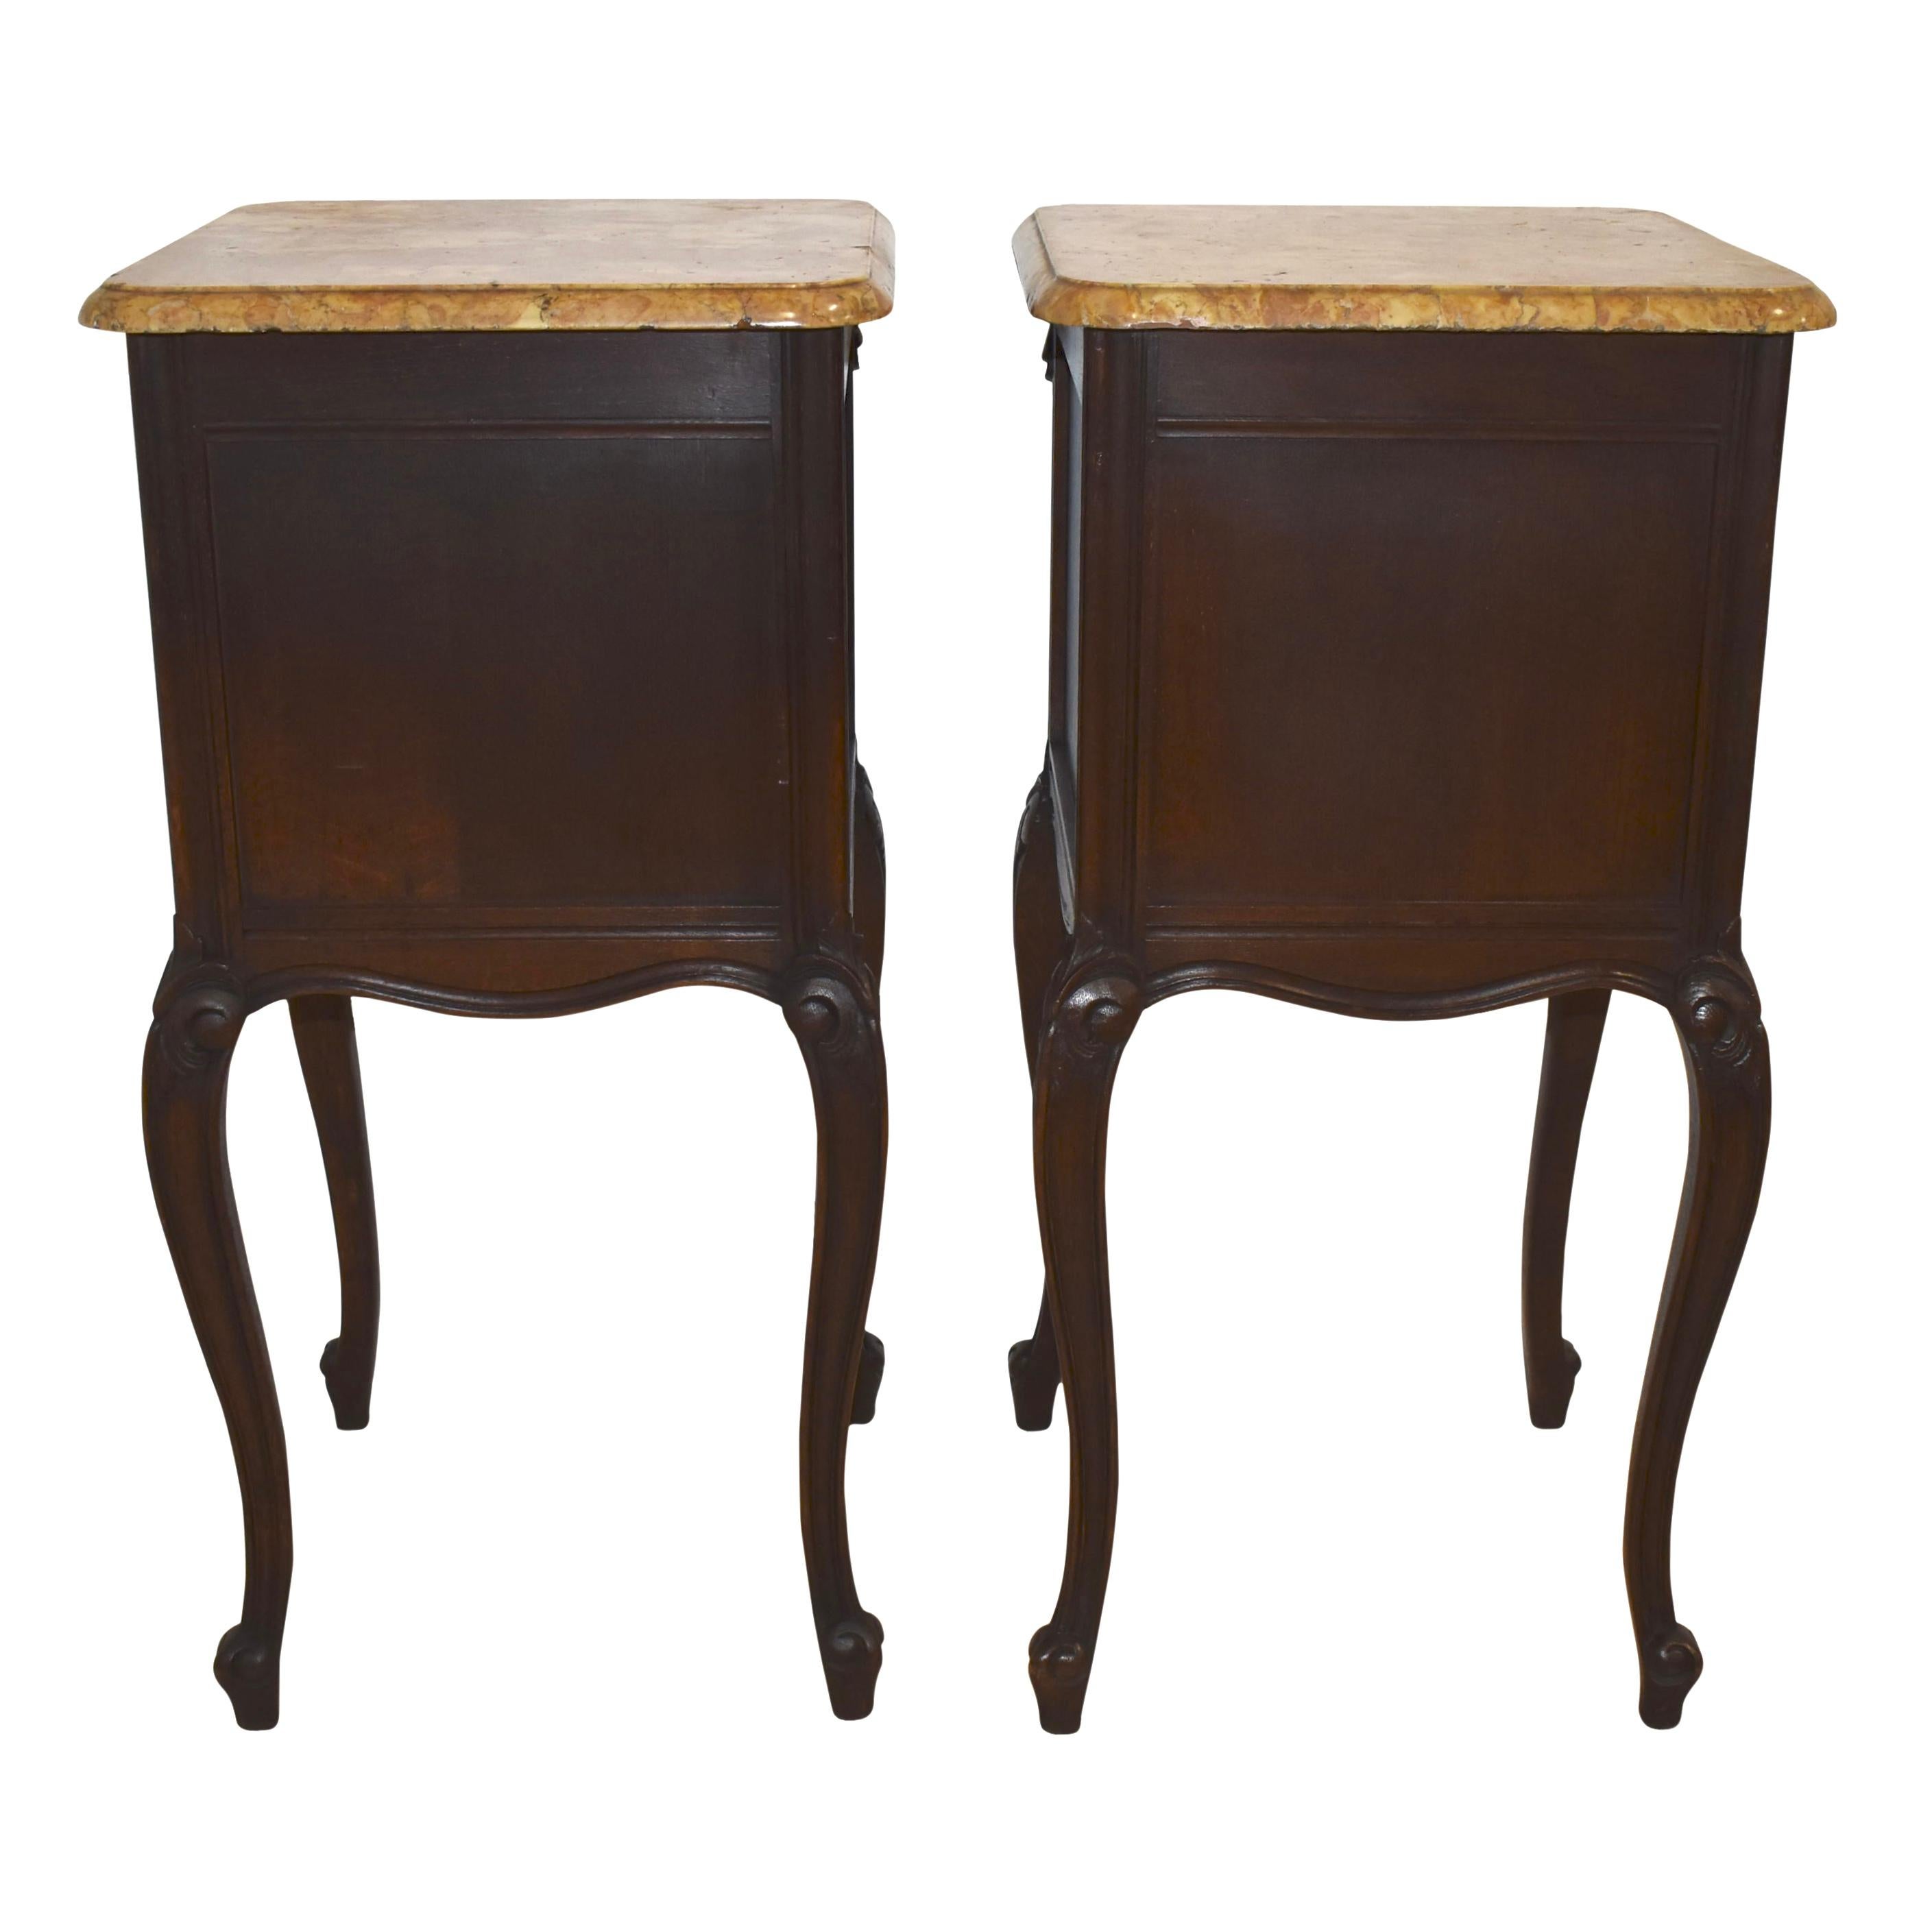 Pair of Carved Oak Nightstand Bedside Tables with Mable Tops, Circa 1900 For Sale 2